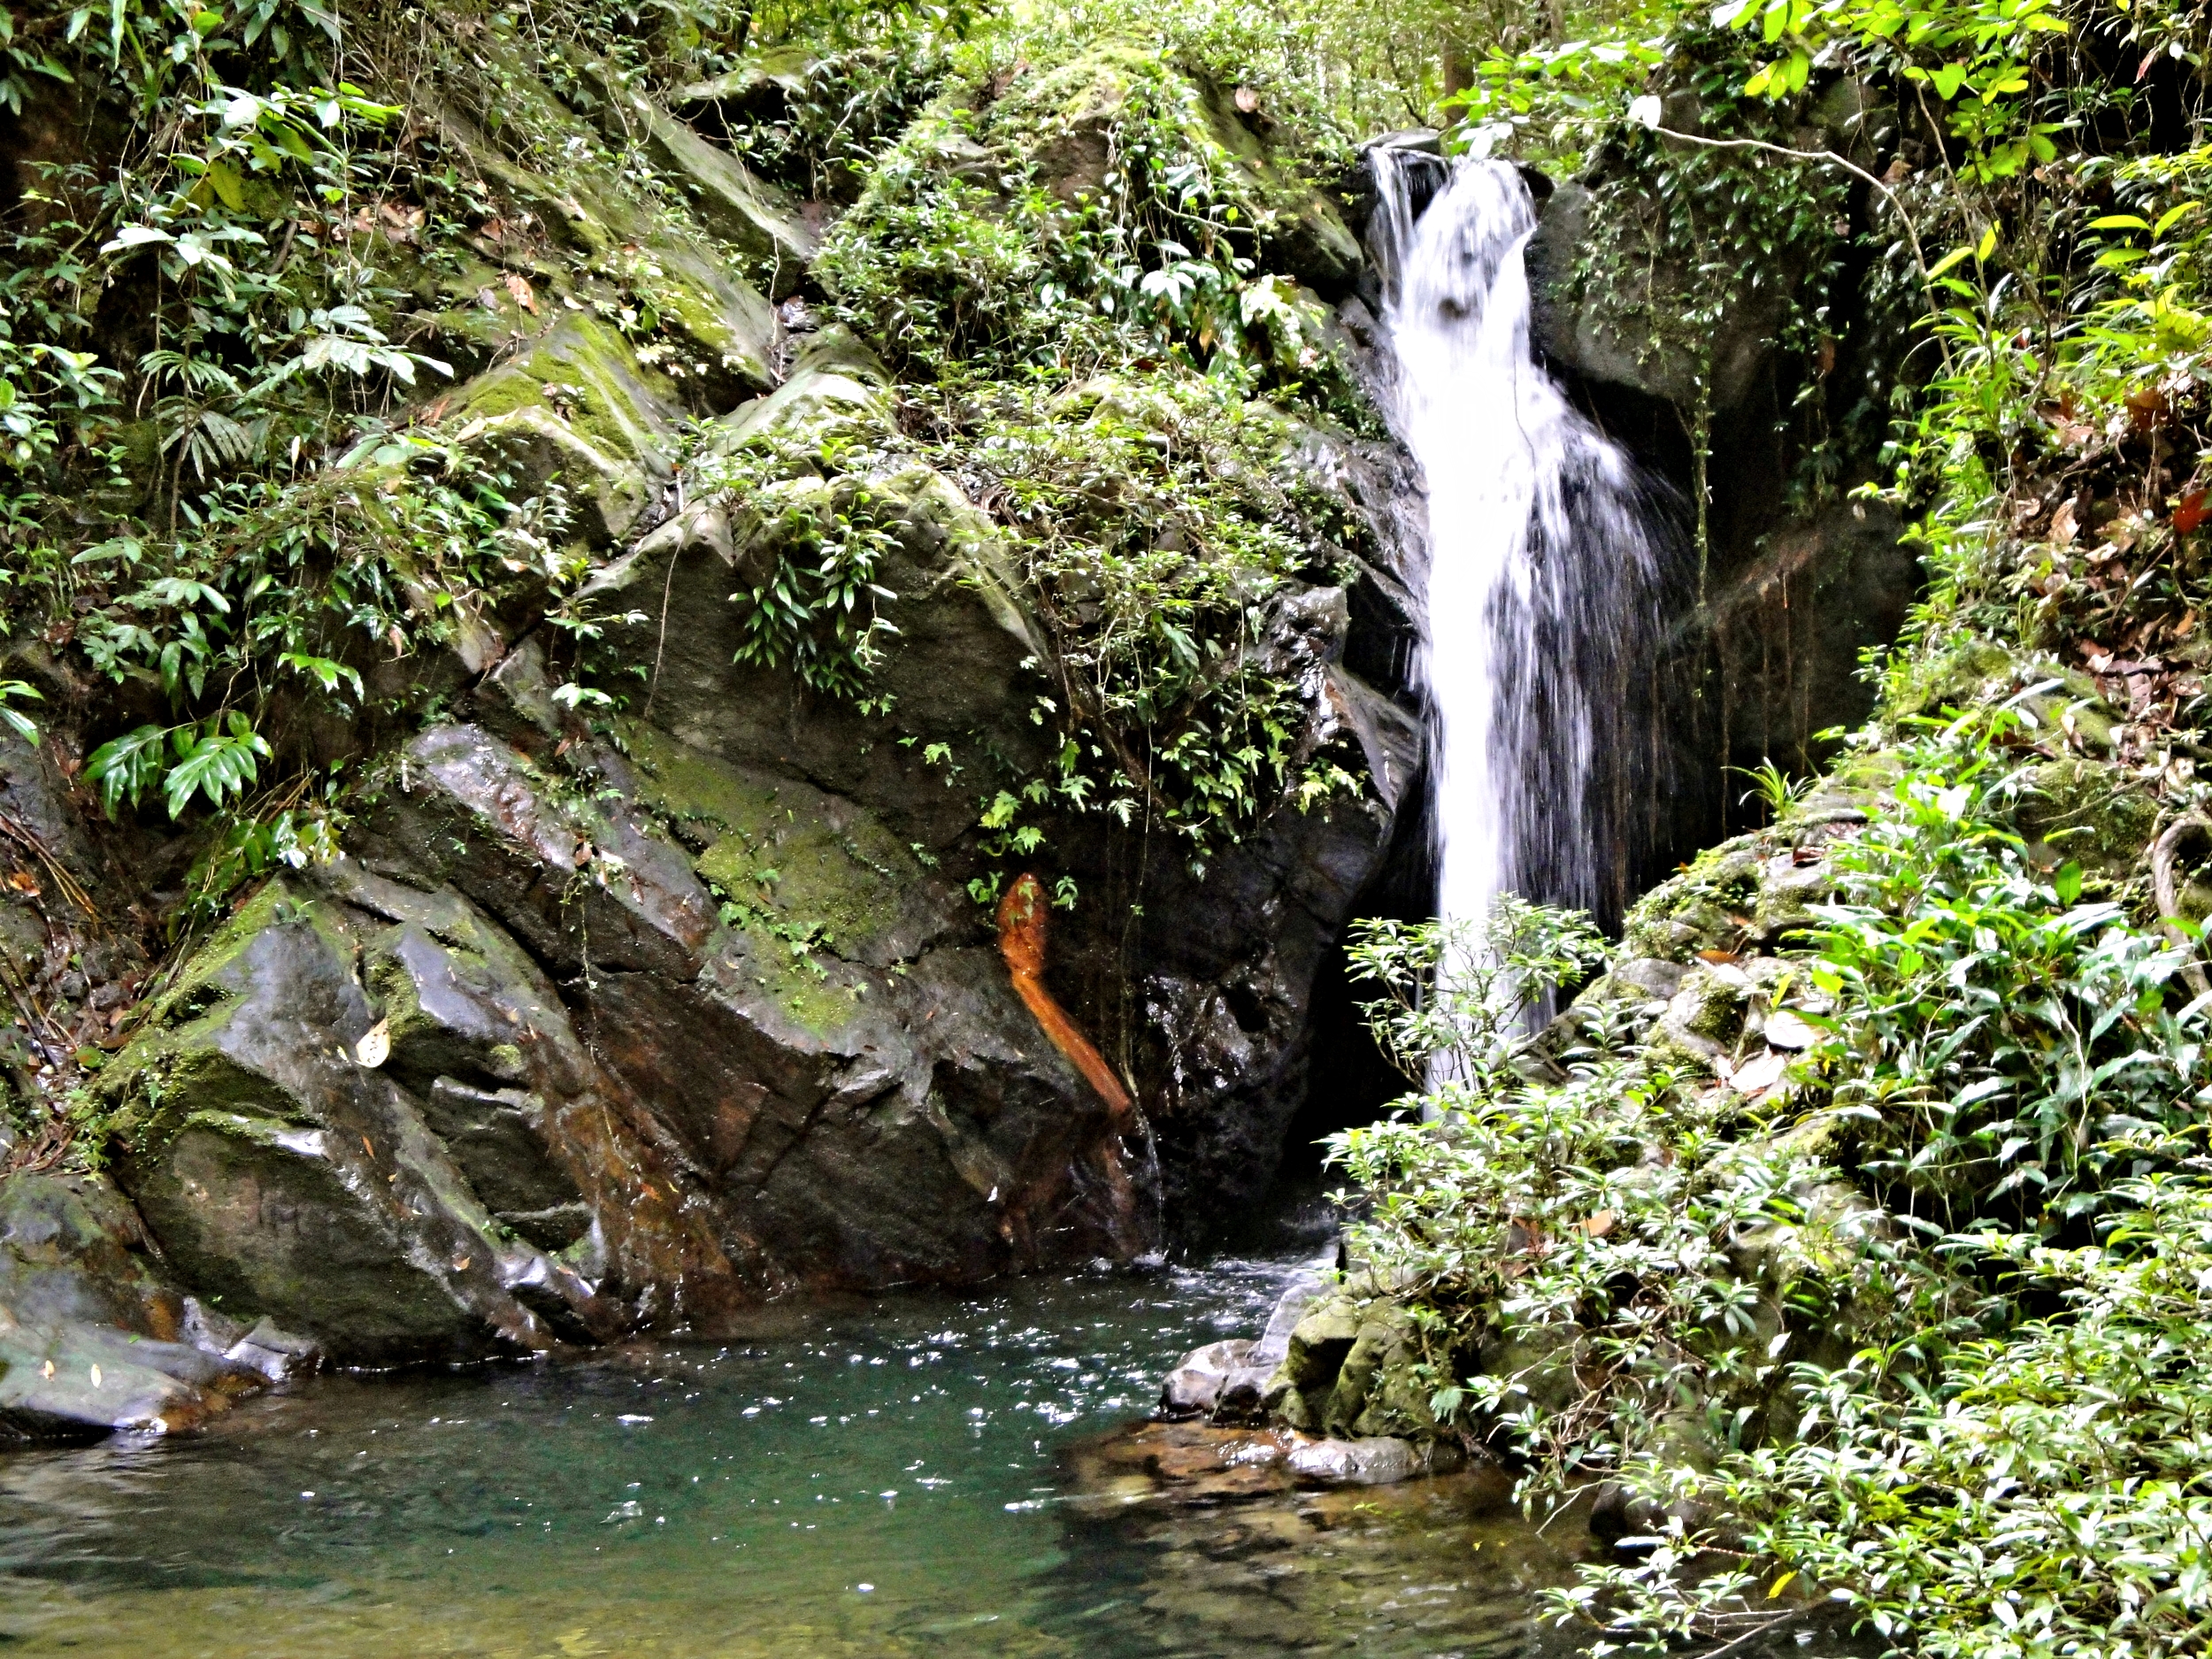 Several waterfalls lie hidden in the forests of the Cockscomb Basin